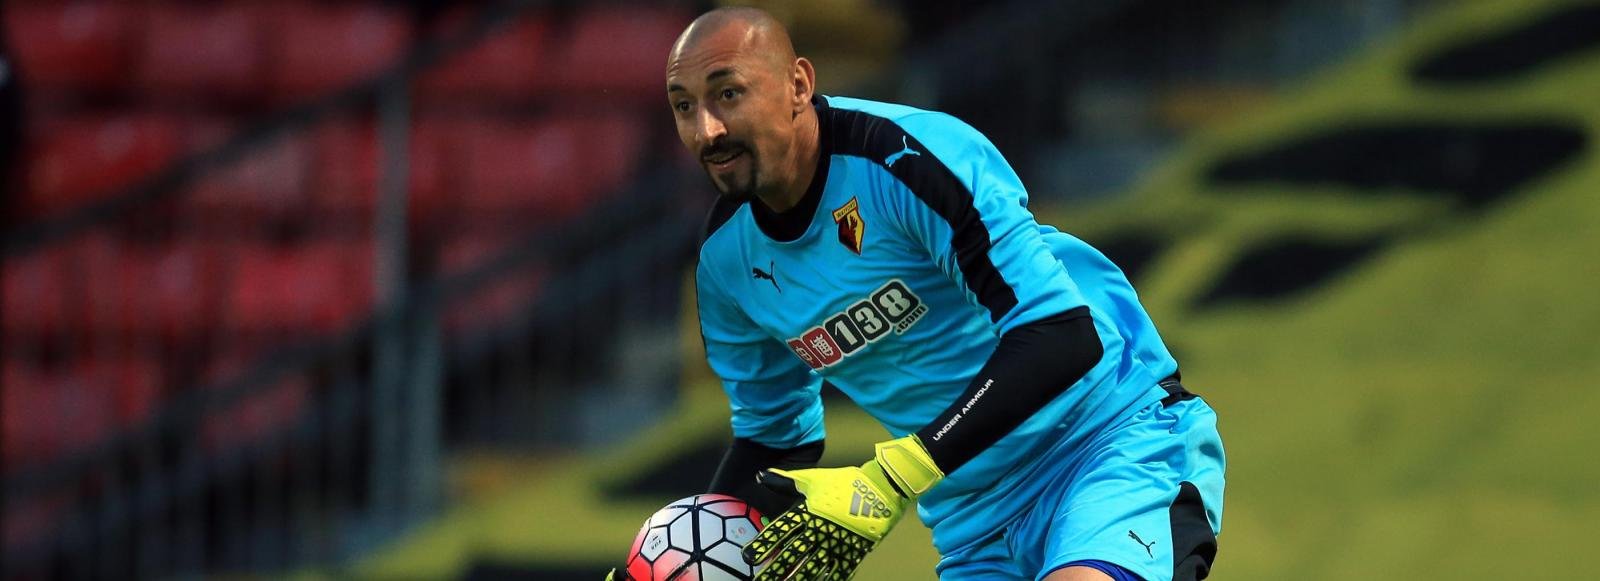 Watford’s unlikely star between the sticks